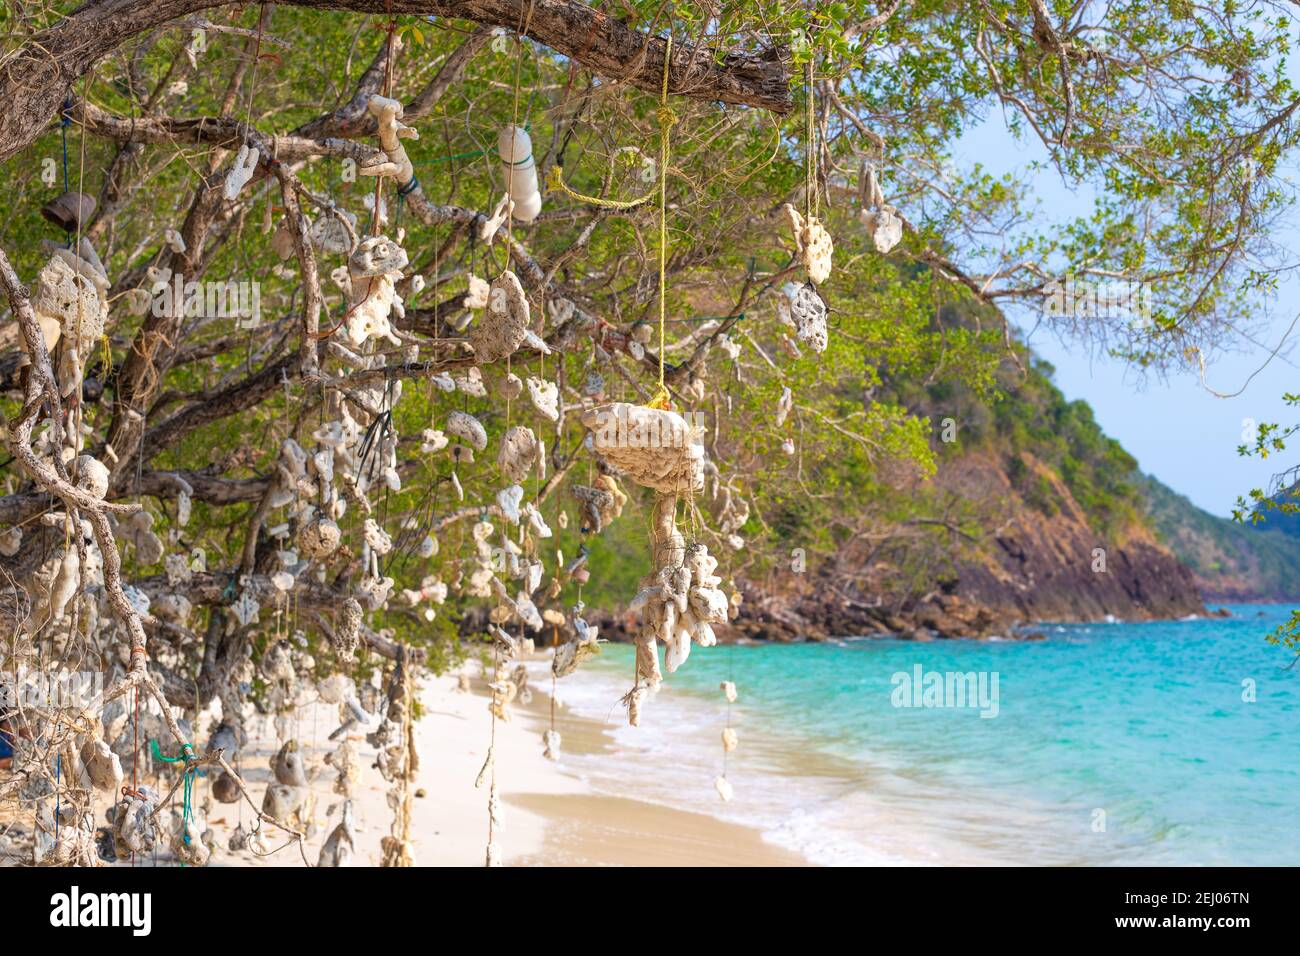 Wish tree. Corals hanging from a tree, tied by strings, on a tropical coast in Thailand. Stock Photo